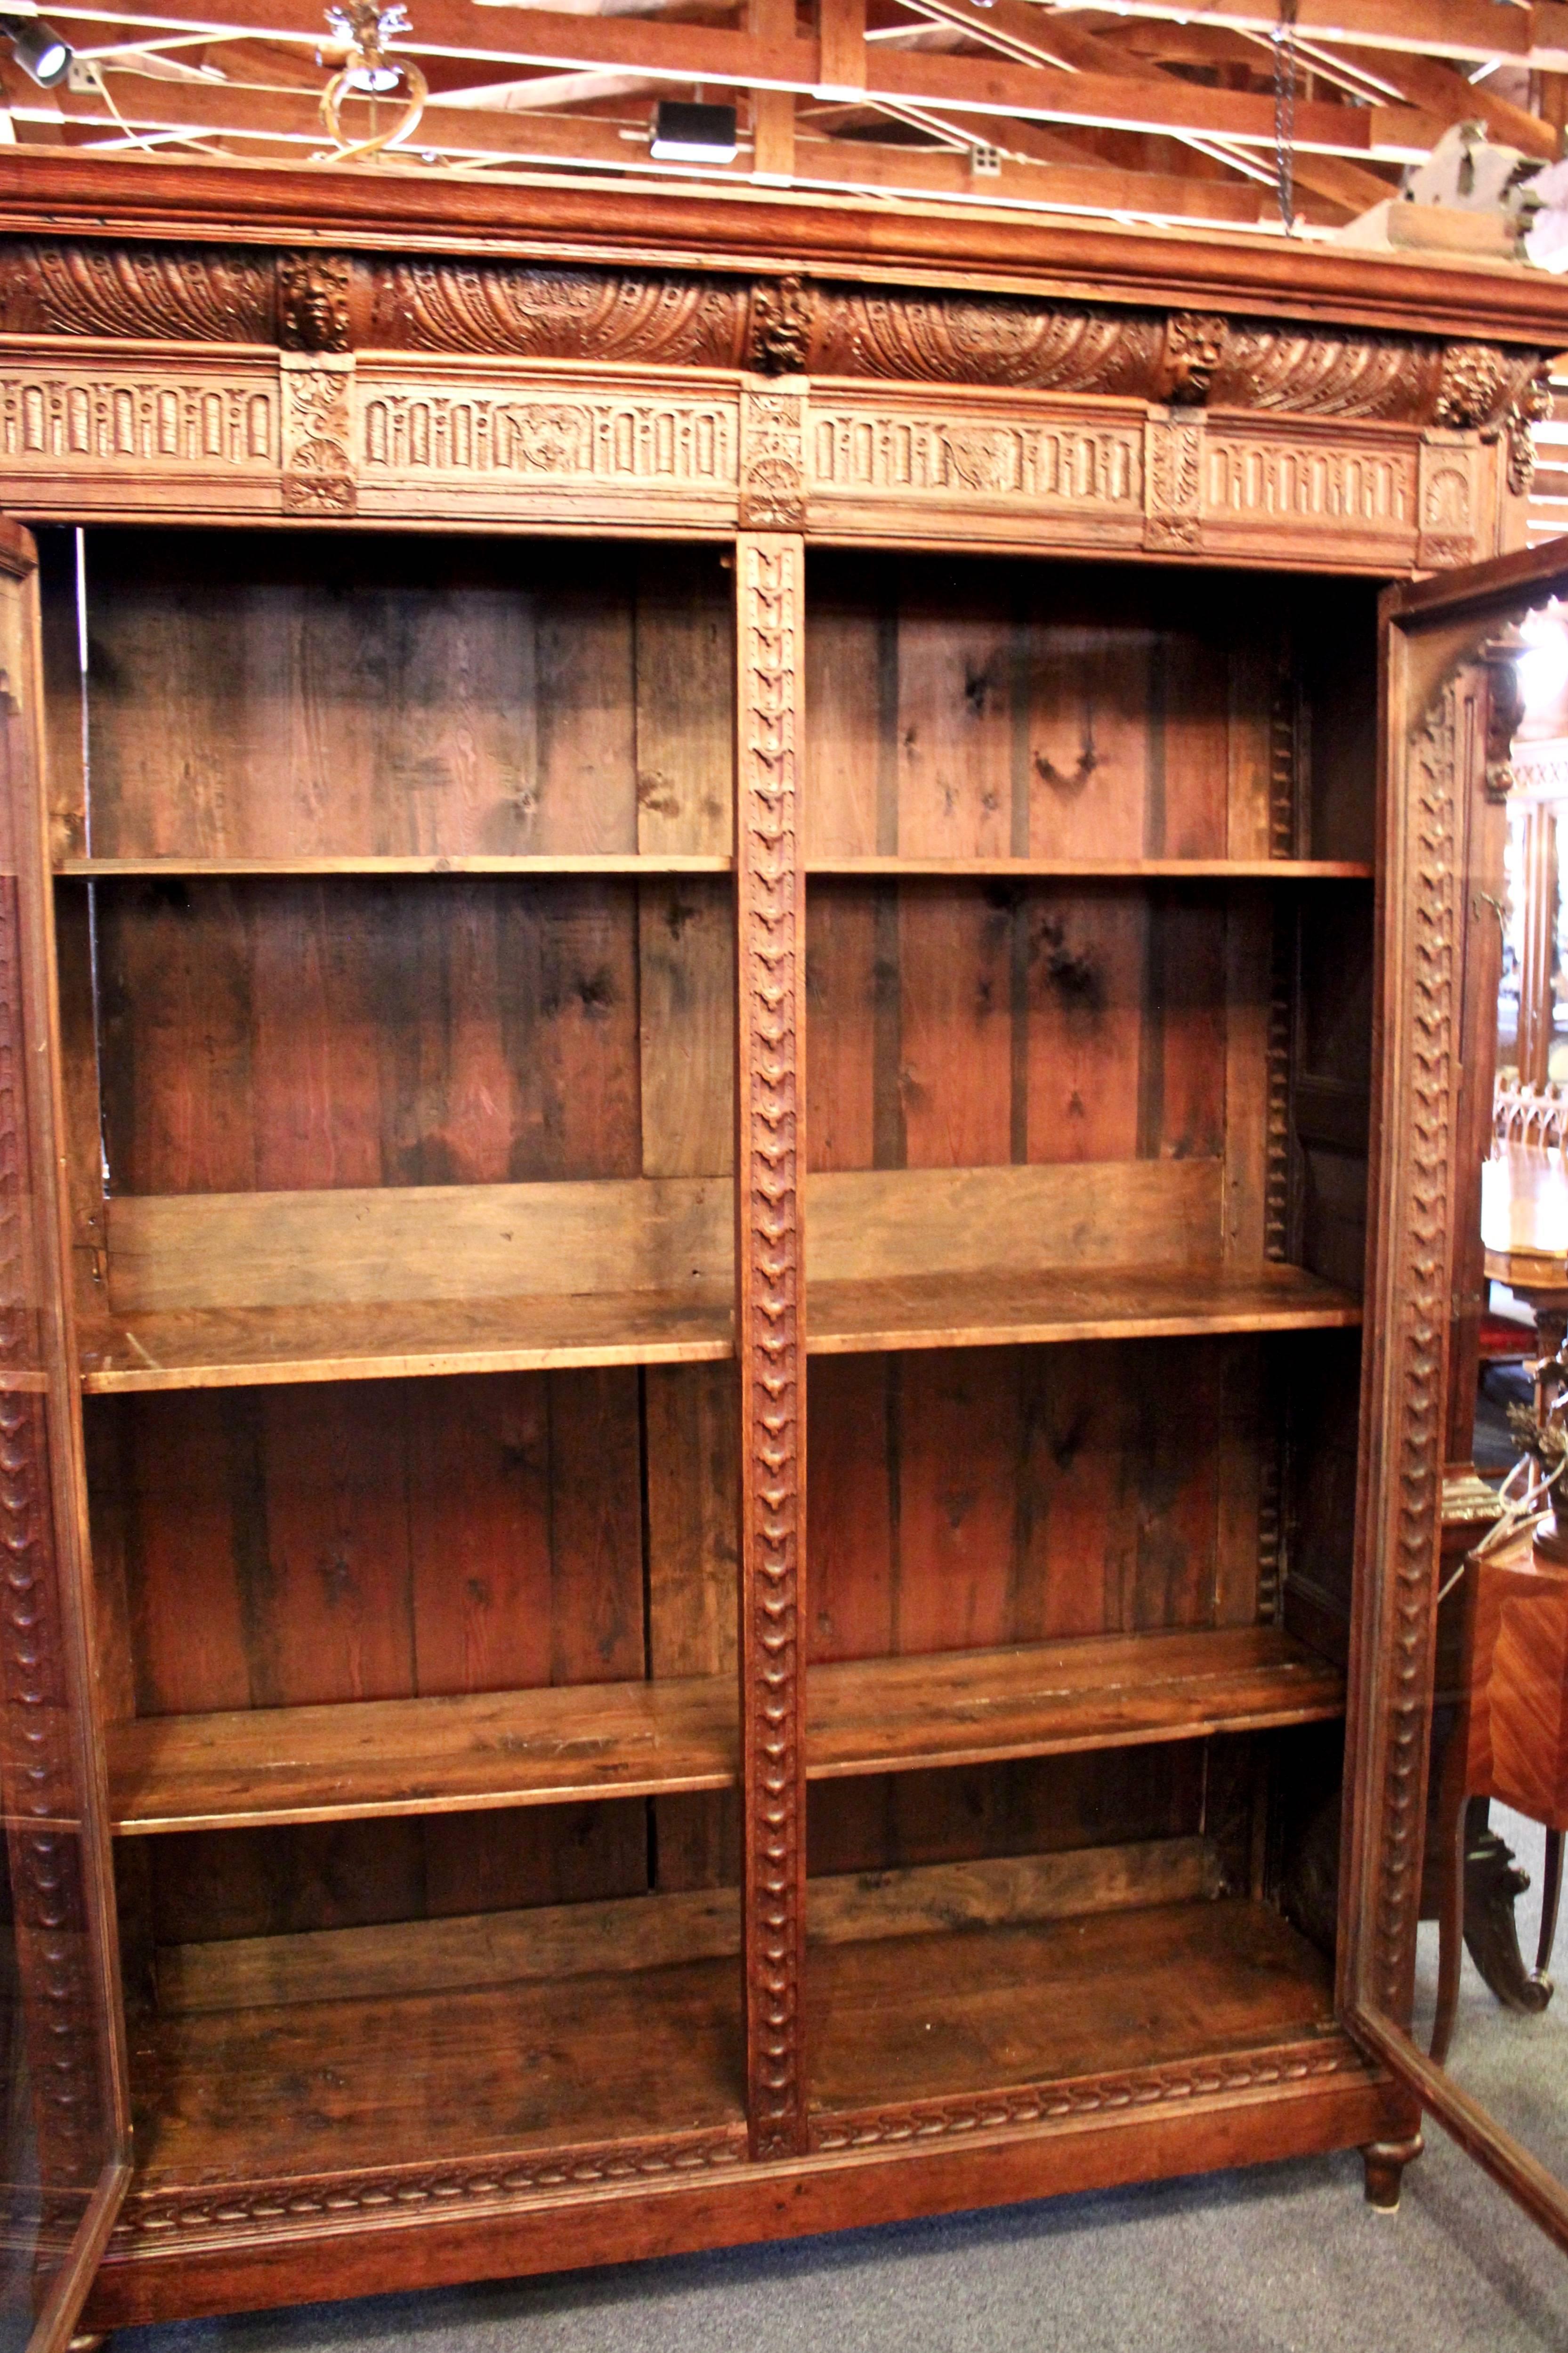 This hand-carved bookcase features two swing doors with glass fronts. Each of the nine faces that line the top are unique from the other. Two shields flank the center face with the text "Anno" on one and "1633" on the other.